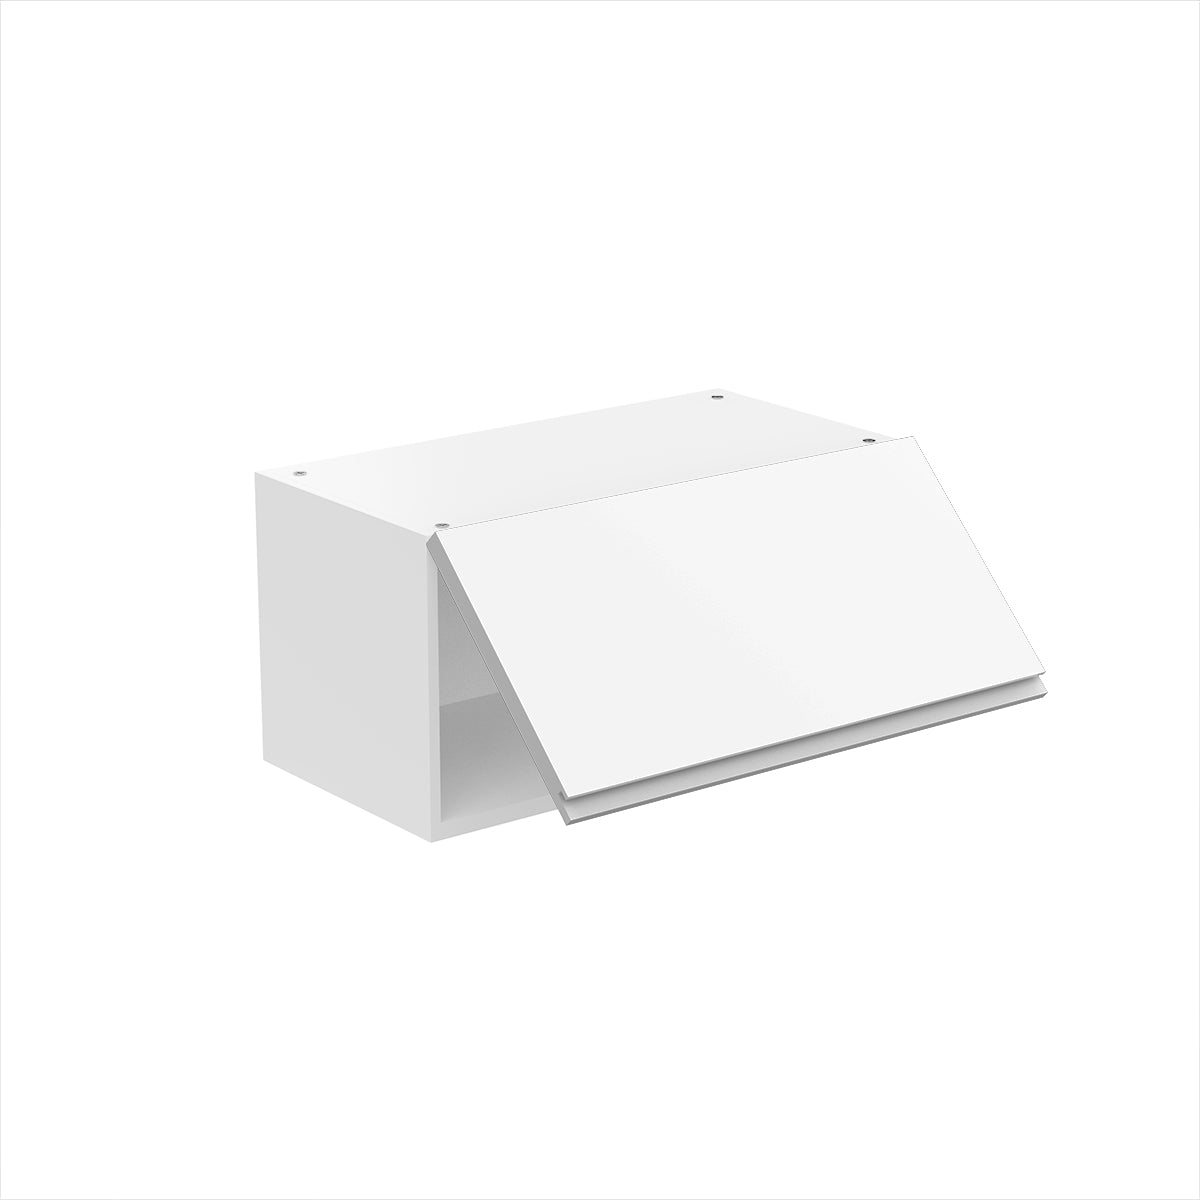 Wall Cabinet - RTA - Lacquer White - Horizontal Door Cabinet | 24"W x 12"H x 12"D